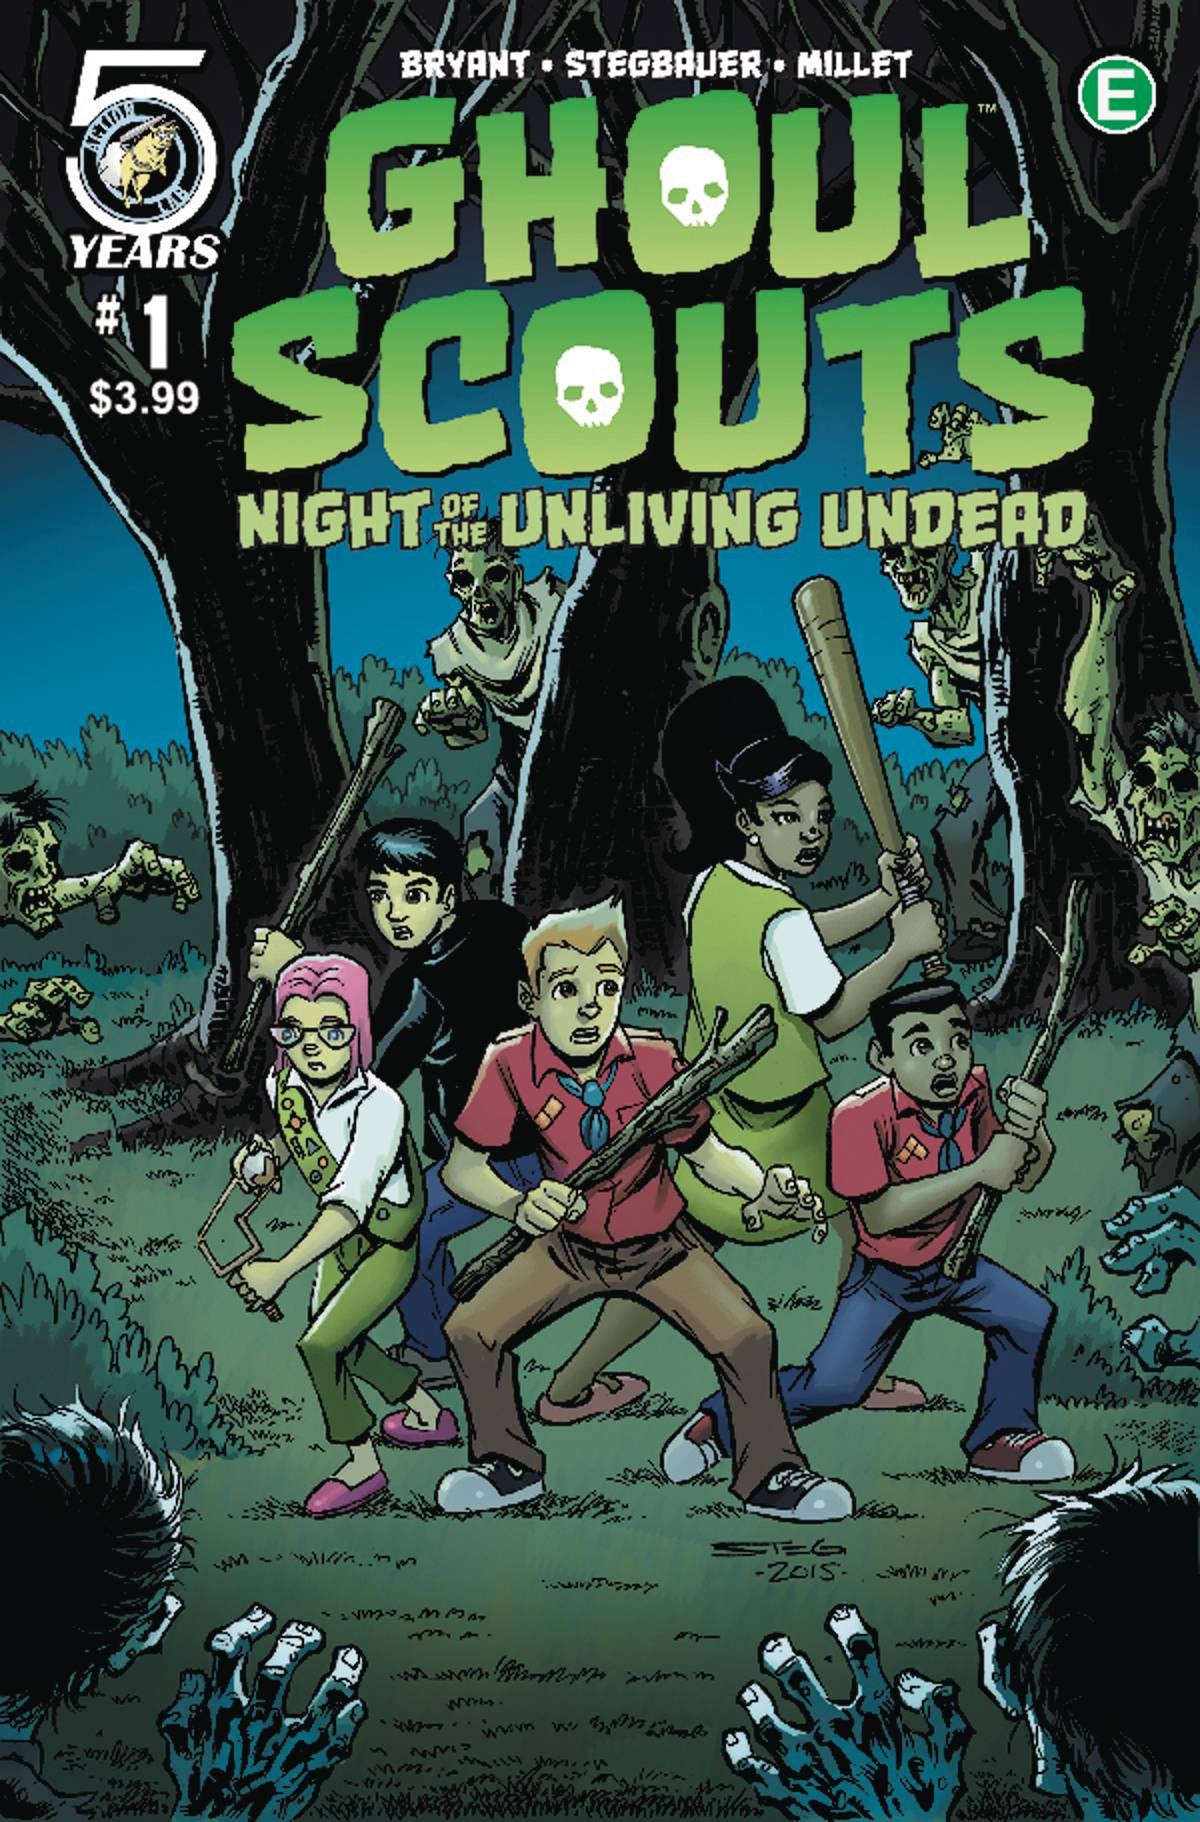 GHOUL SCOUTS NIGHT OF THE UNLIVING UNDEAD #1 CVR A STEGBAUER COVER